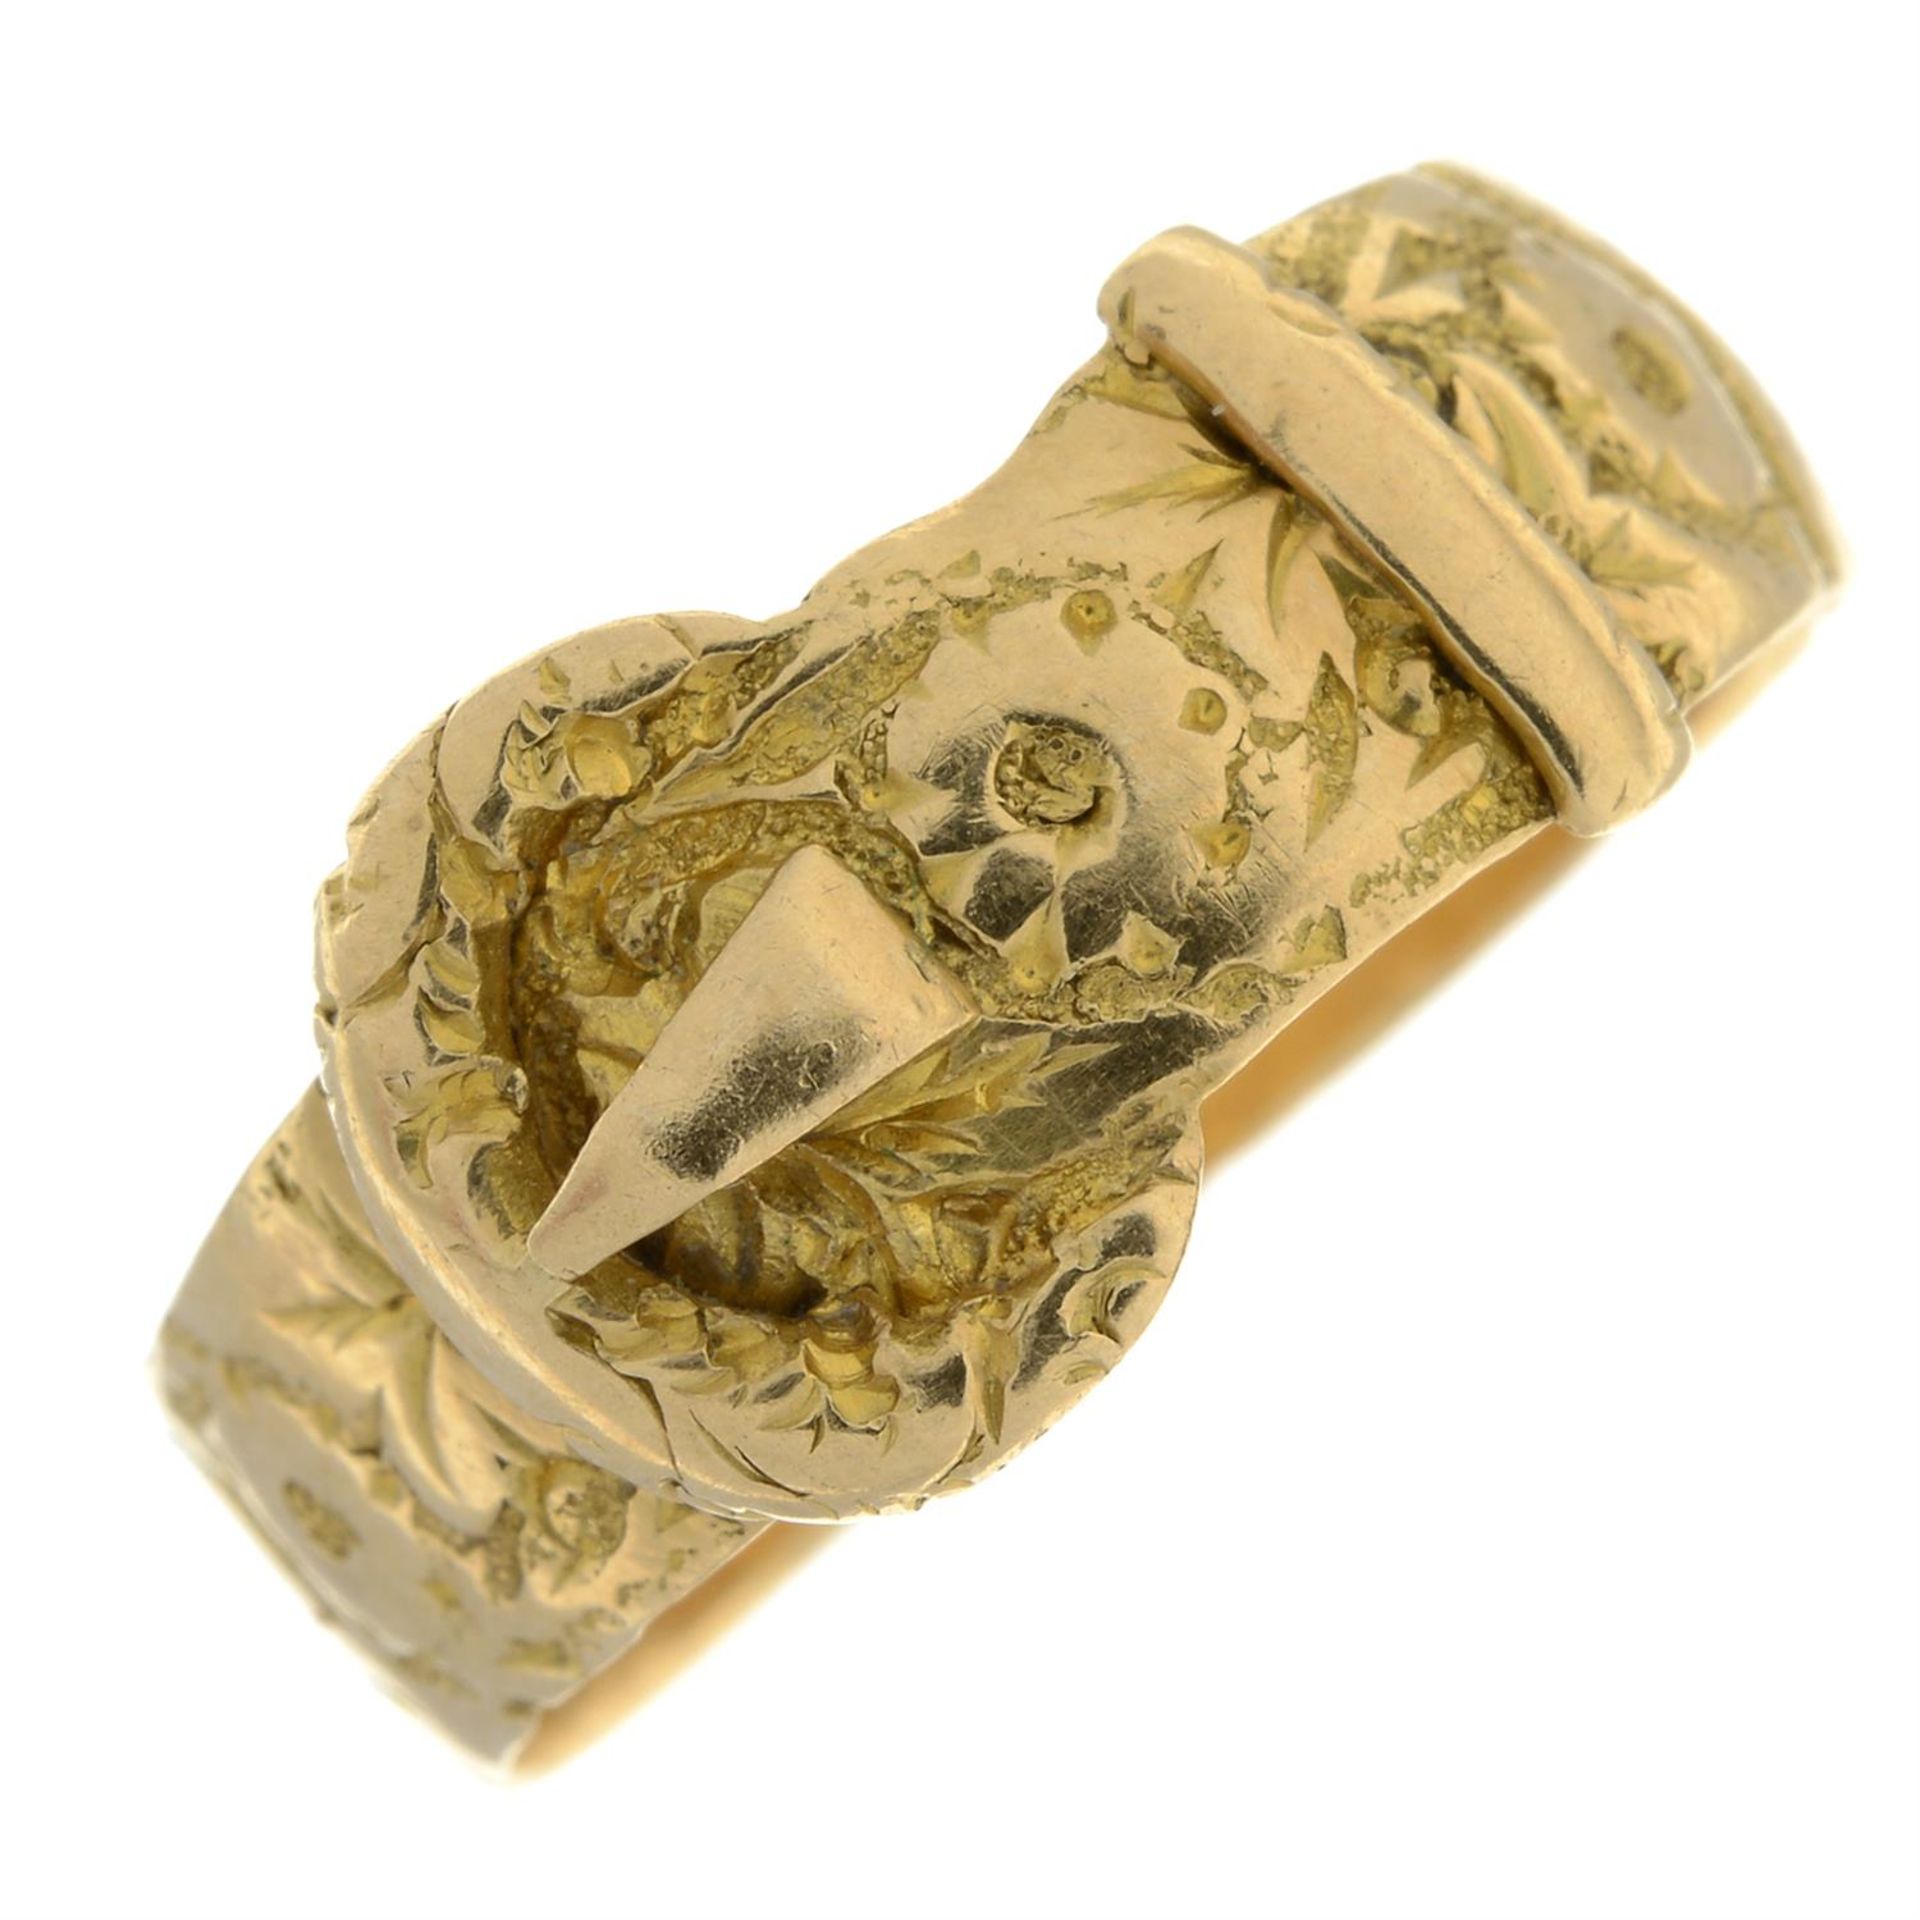 An Edwardian 18ct gold buckle band ring, with floral pattern.